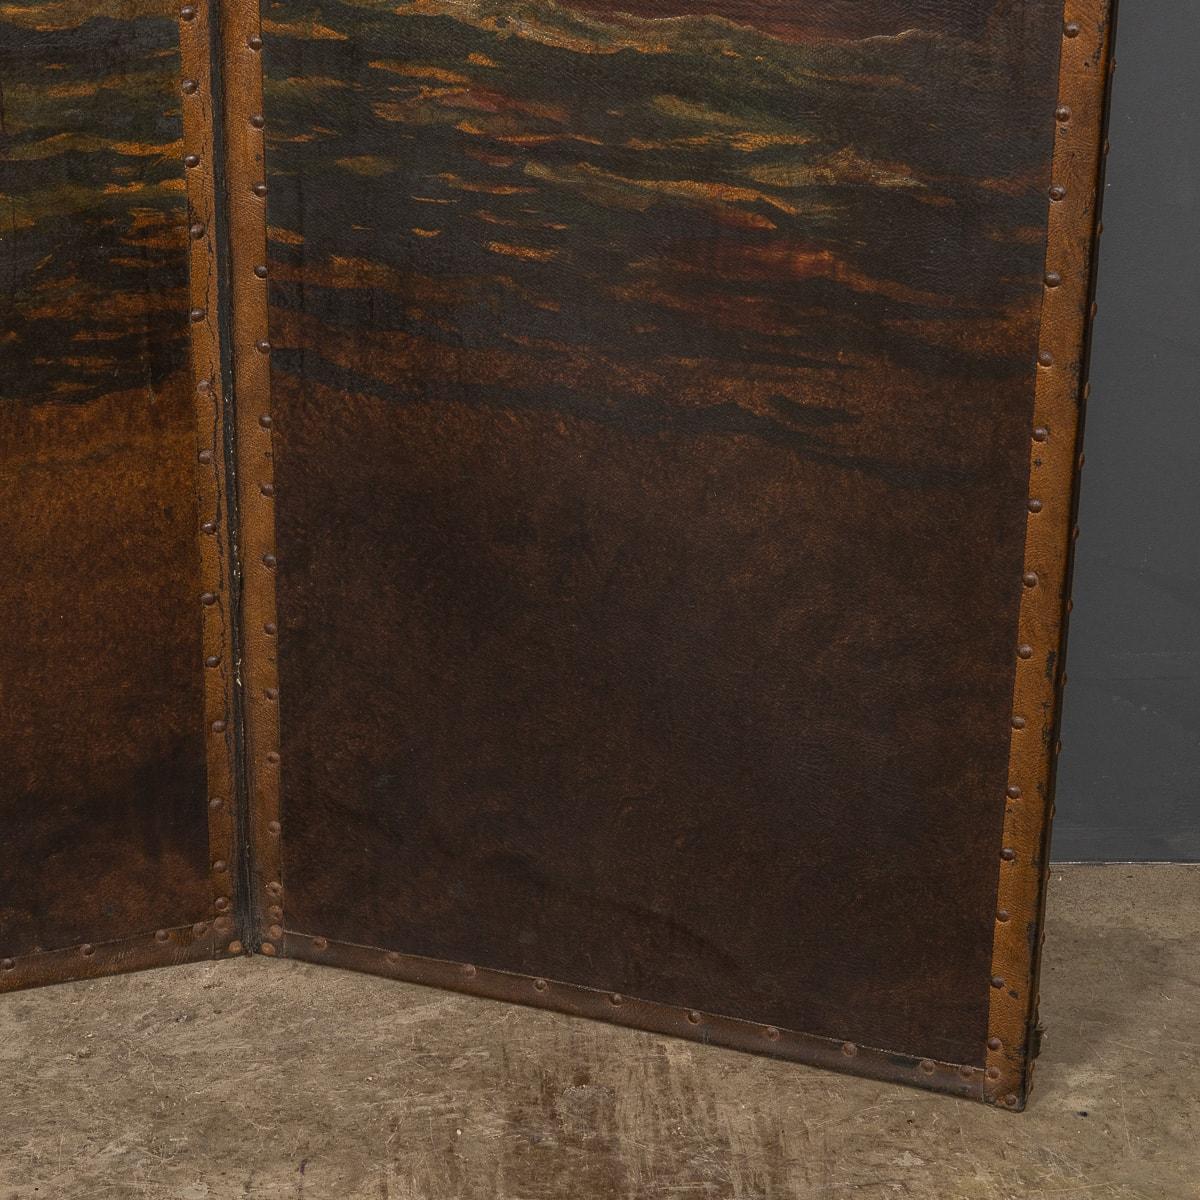 20th Century Oil Painted On Leather Room Screen, c.1920 For Sale 13